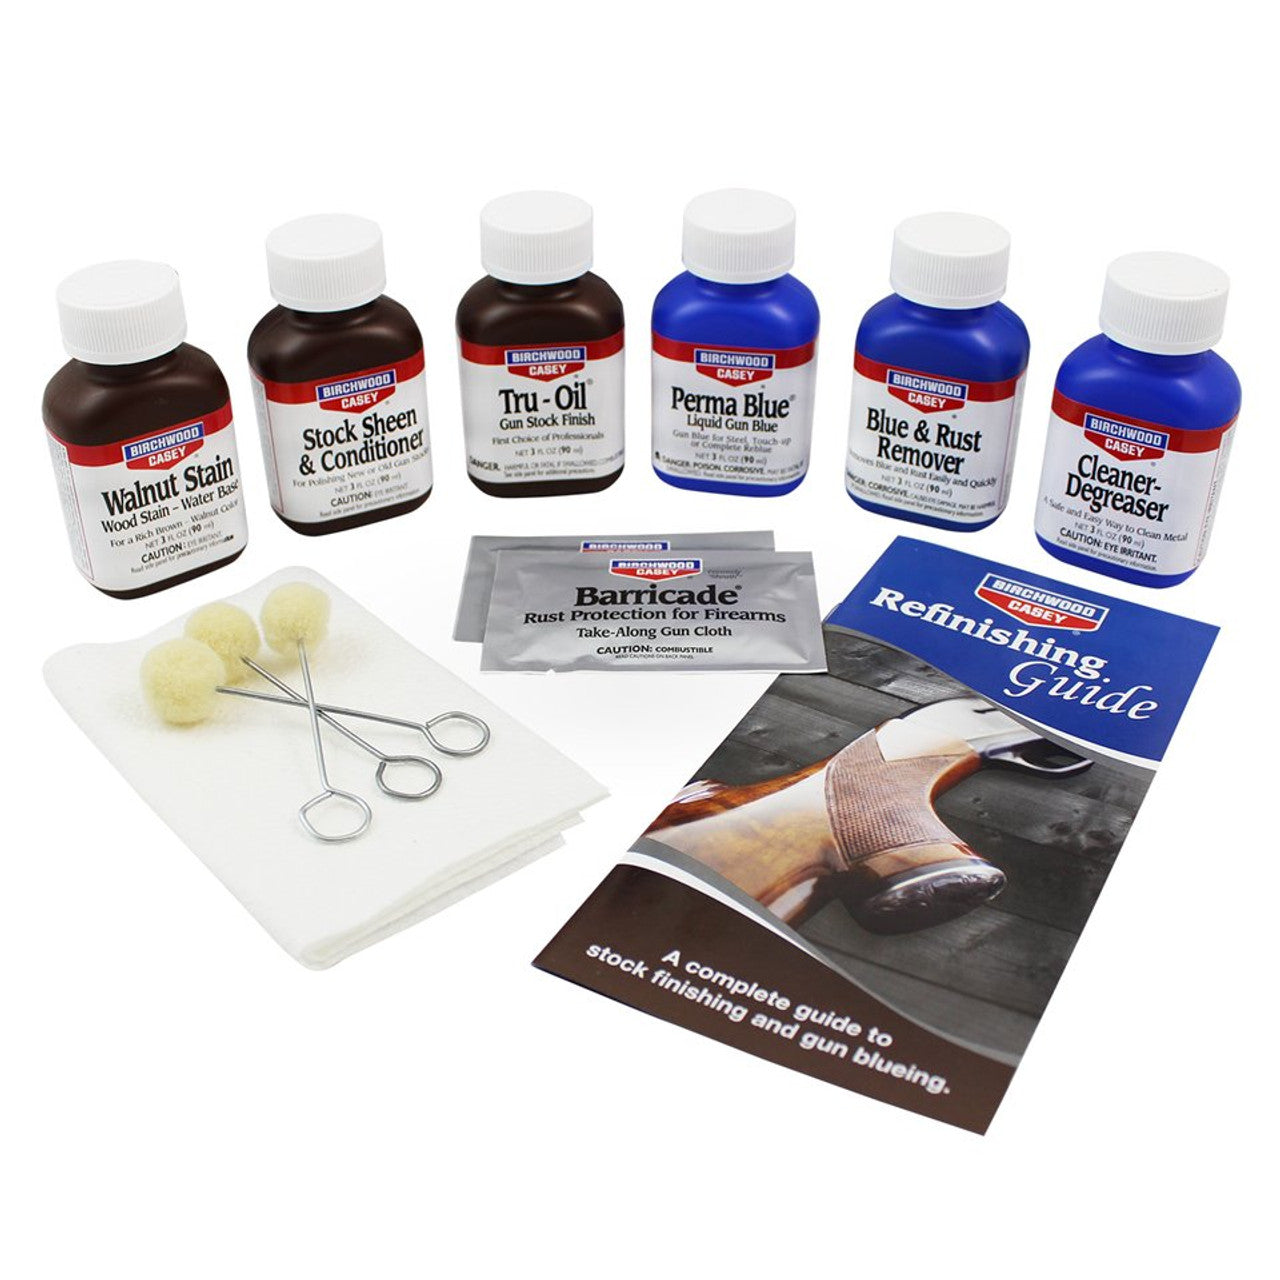 Deluxe Cleaning and Restoration Kit